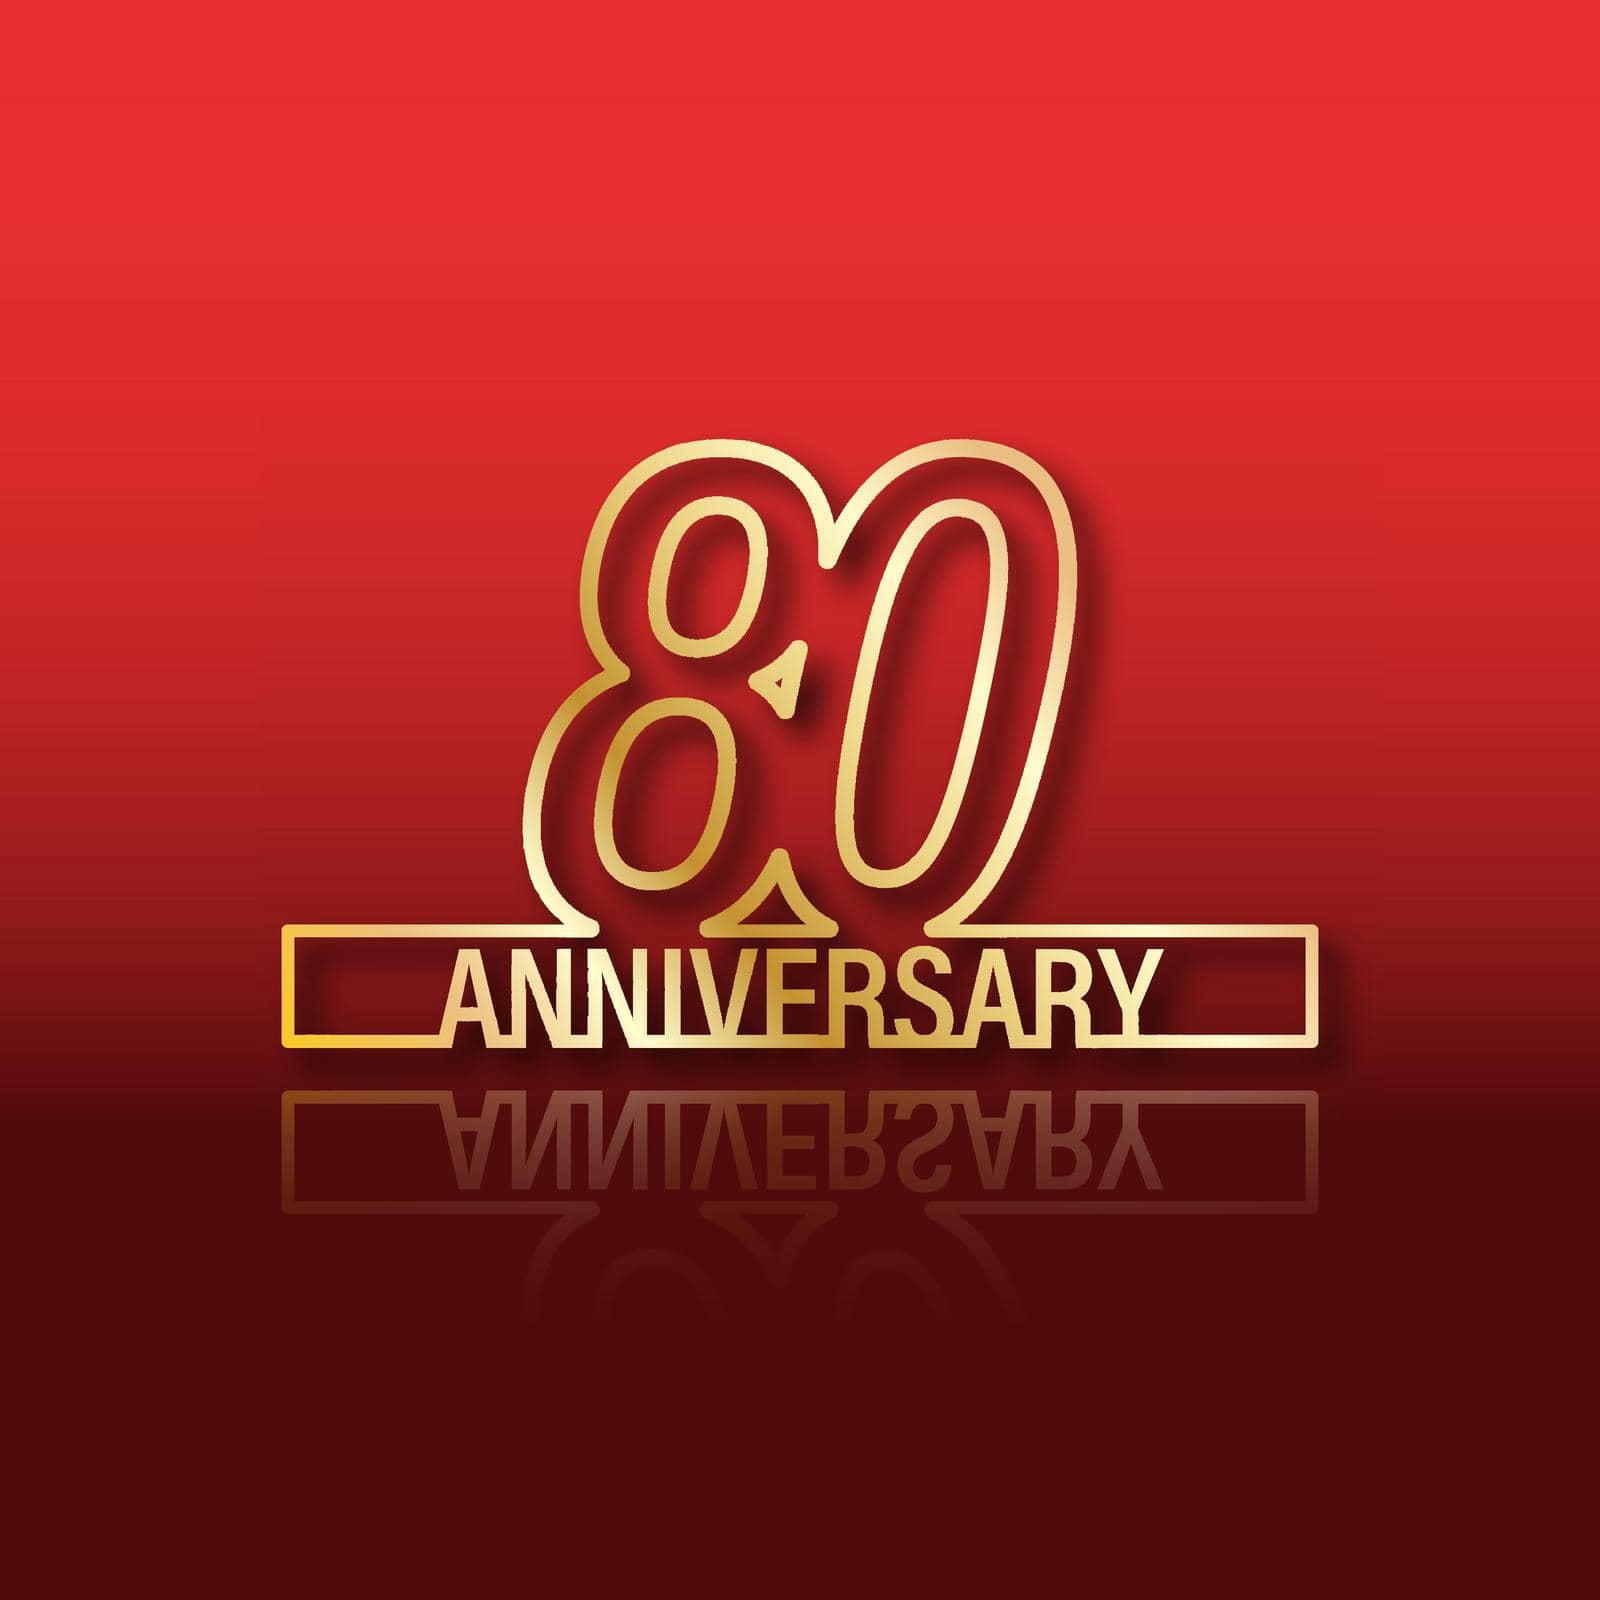 80 anniversary. Stylized gold lettering with reflection on a red gradient background by Grommik